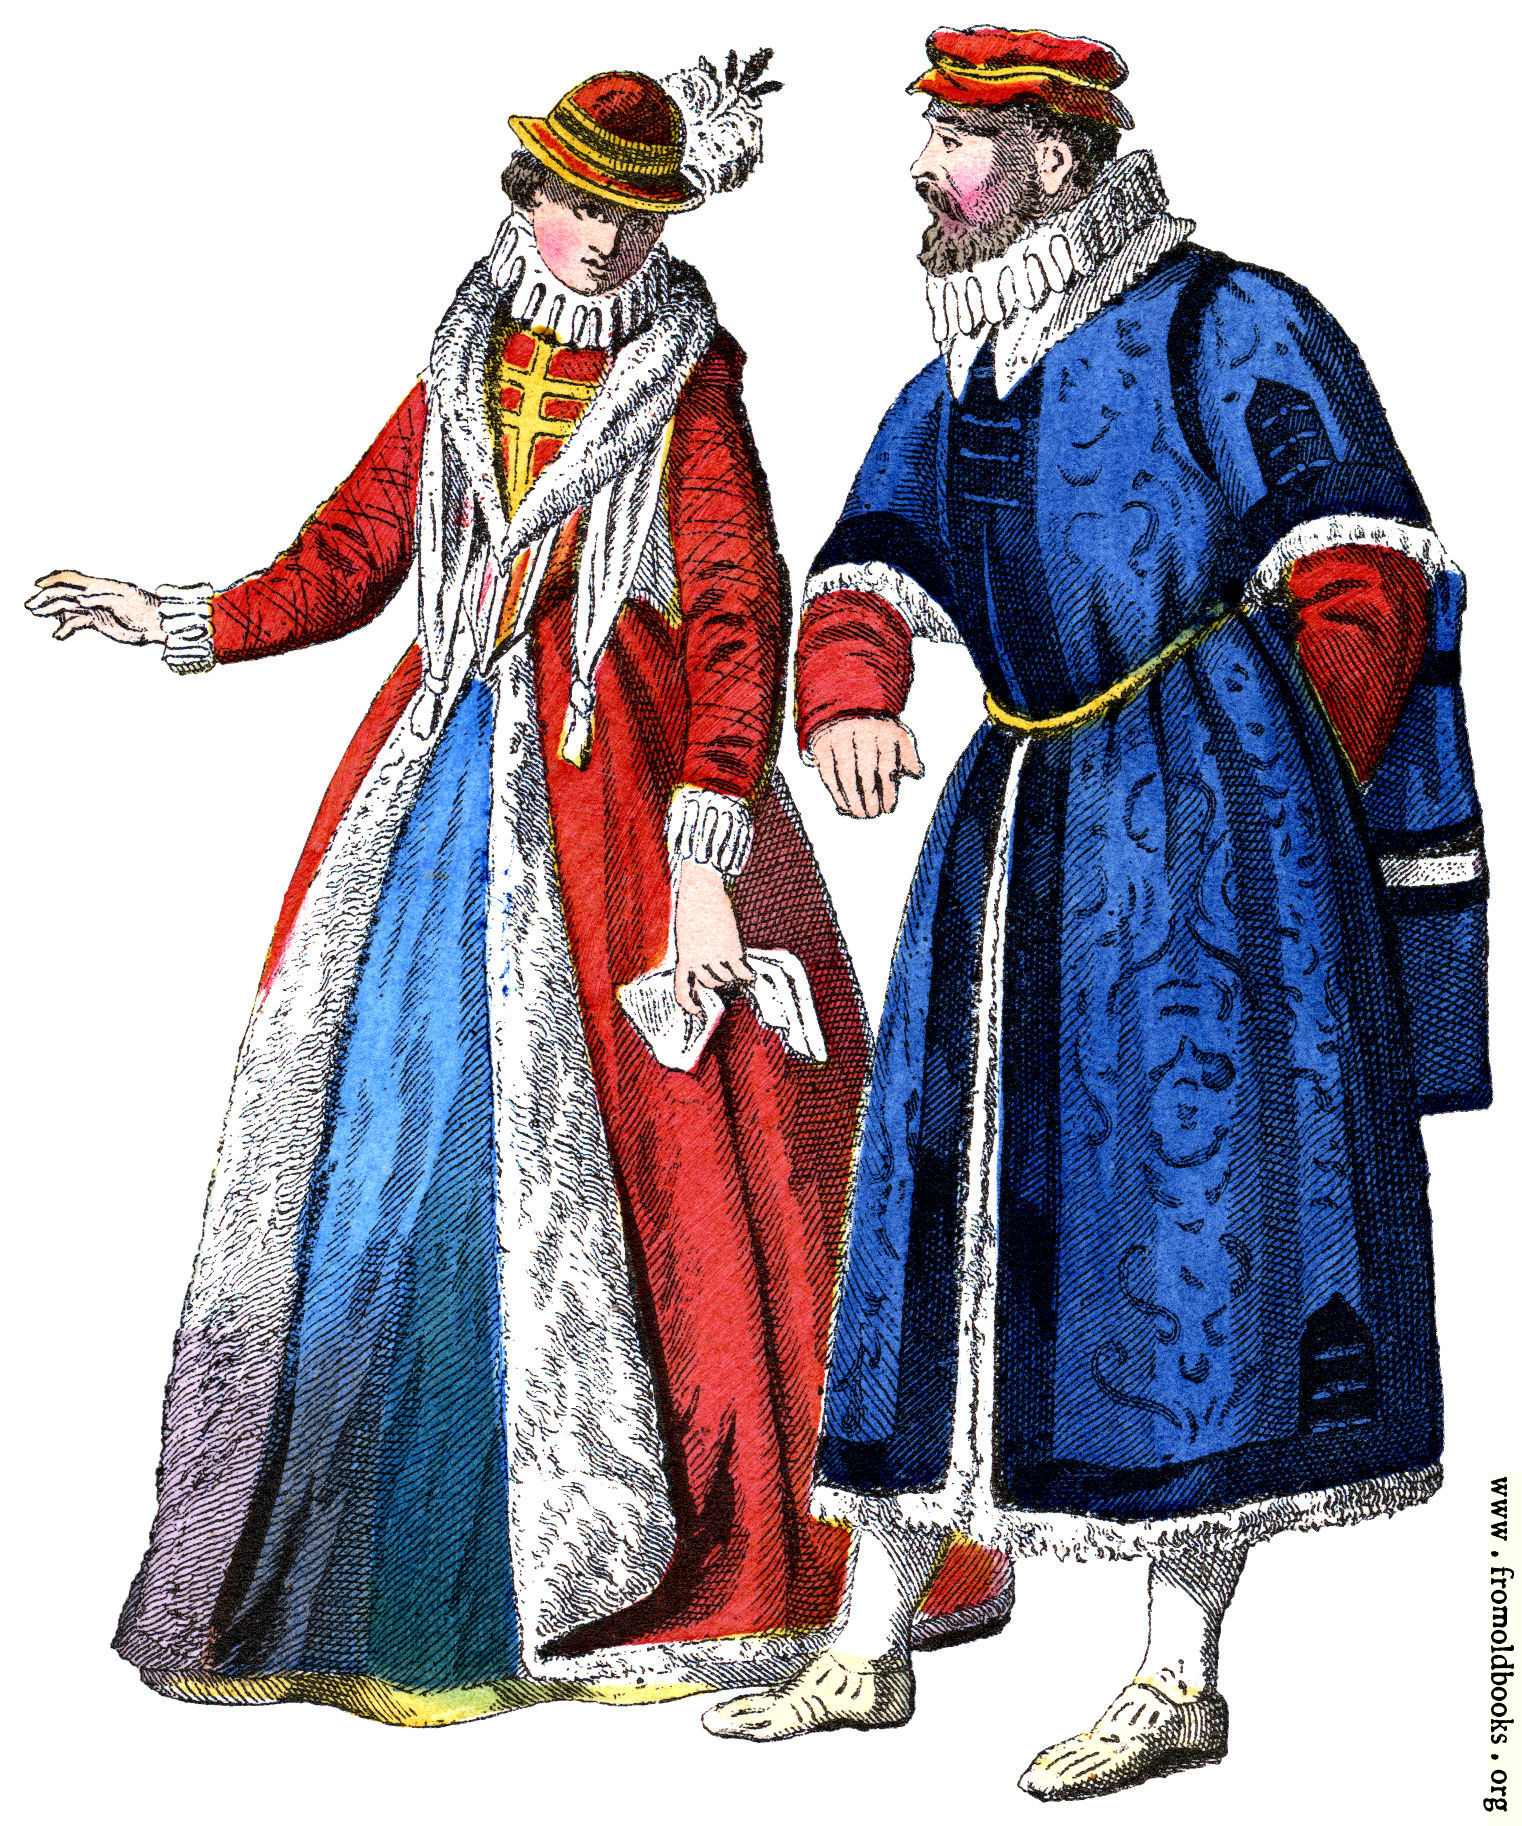 [Picture: Sixteenth-century noble couple]